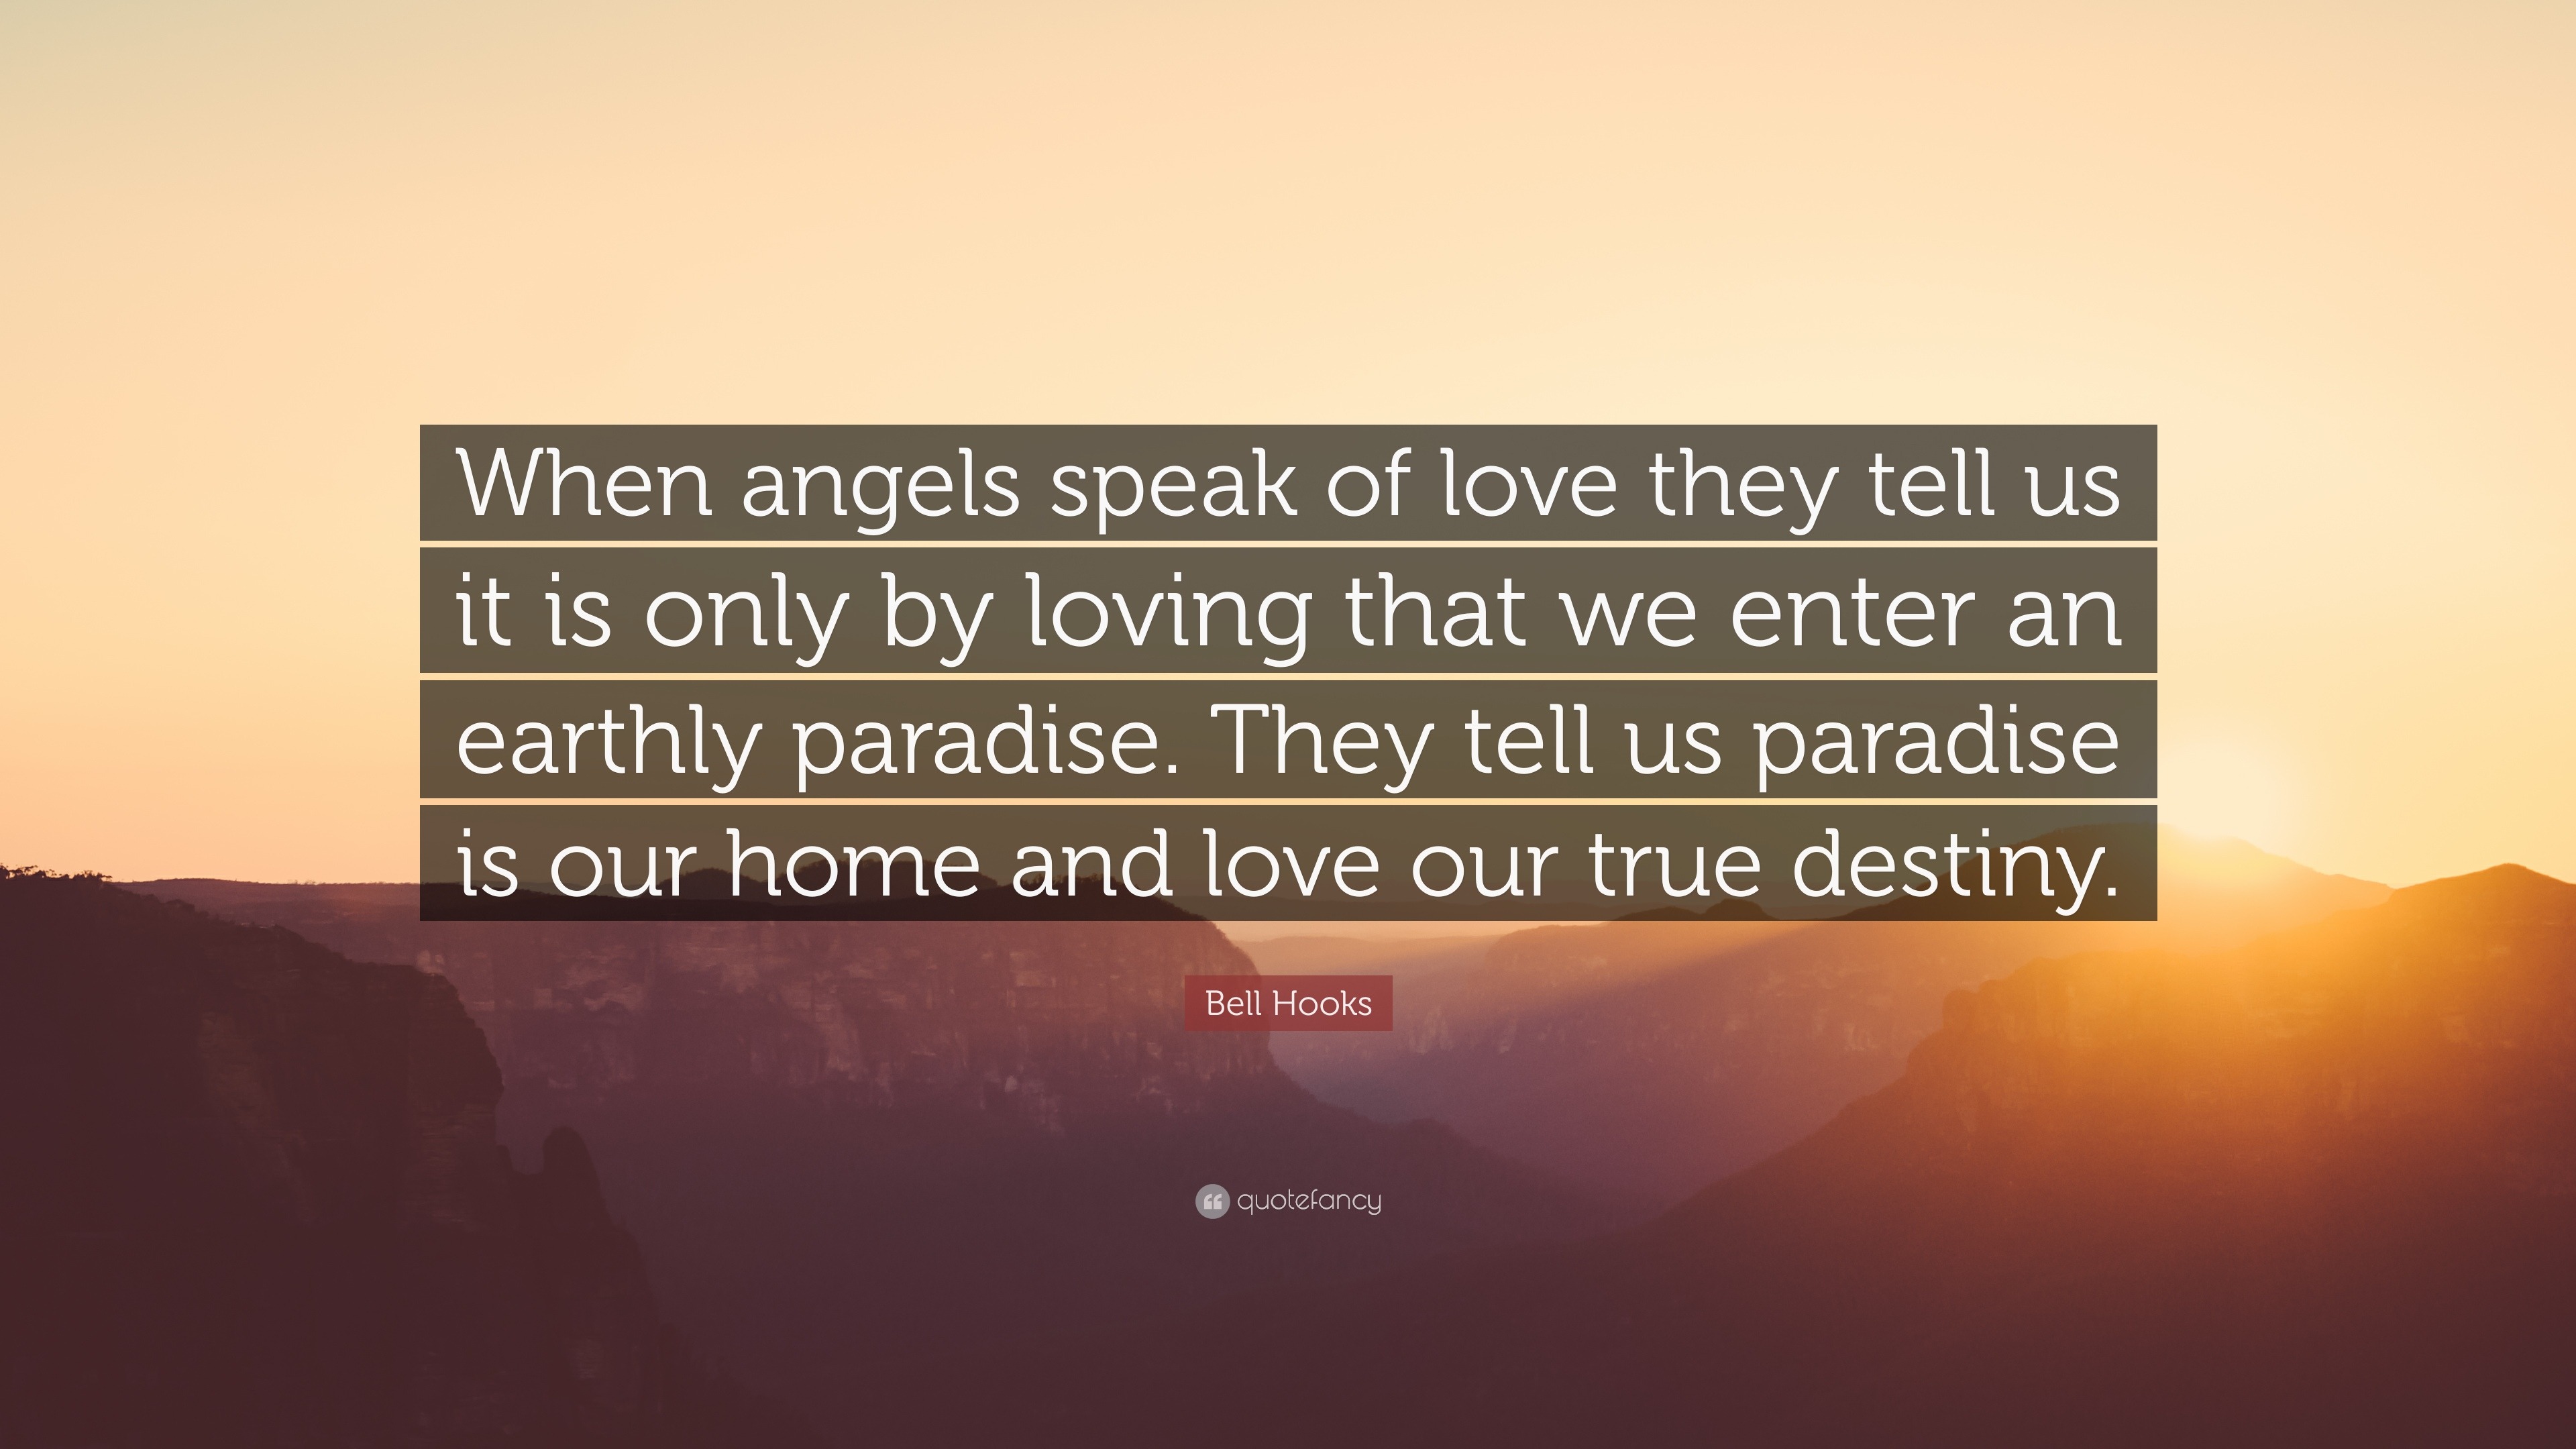 Bell Hooks Quote “When angels speak of love they tell us it is only